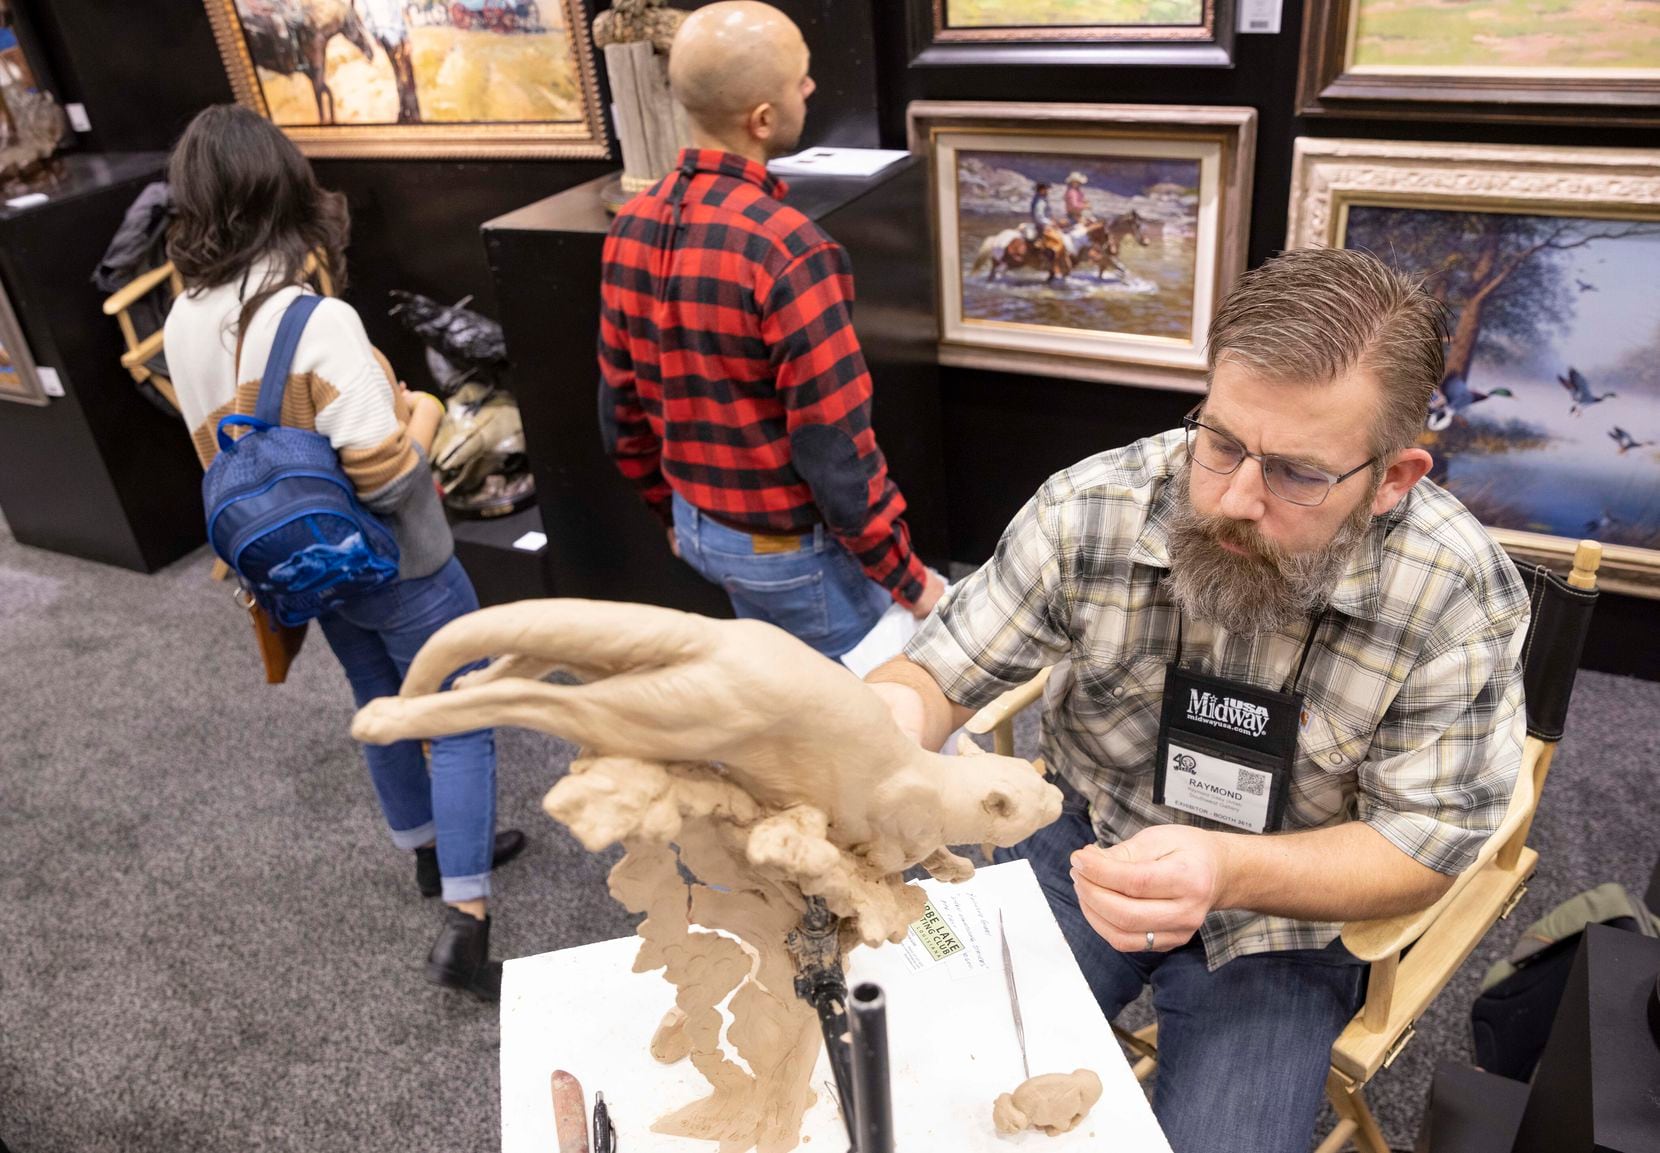 Raymond Gibby of Utah worked on a sculpture as people browsed the Southwest Gallery booth...